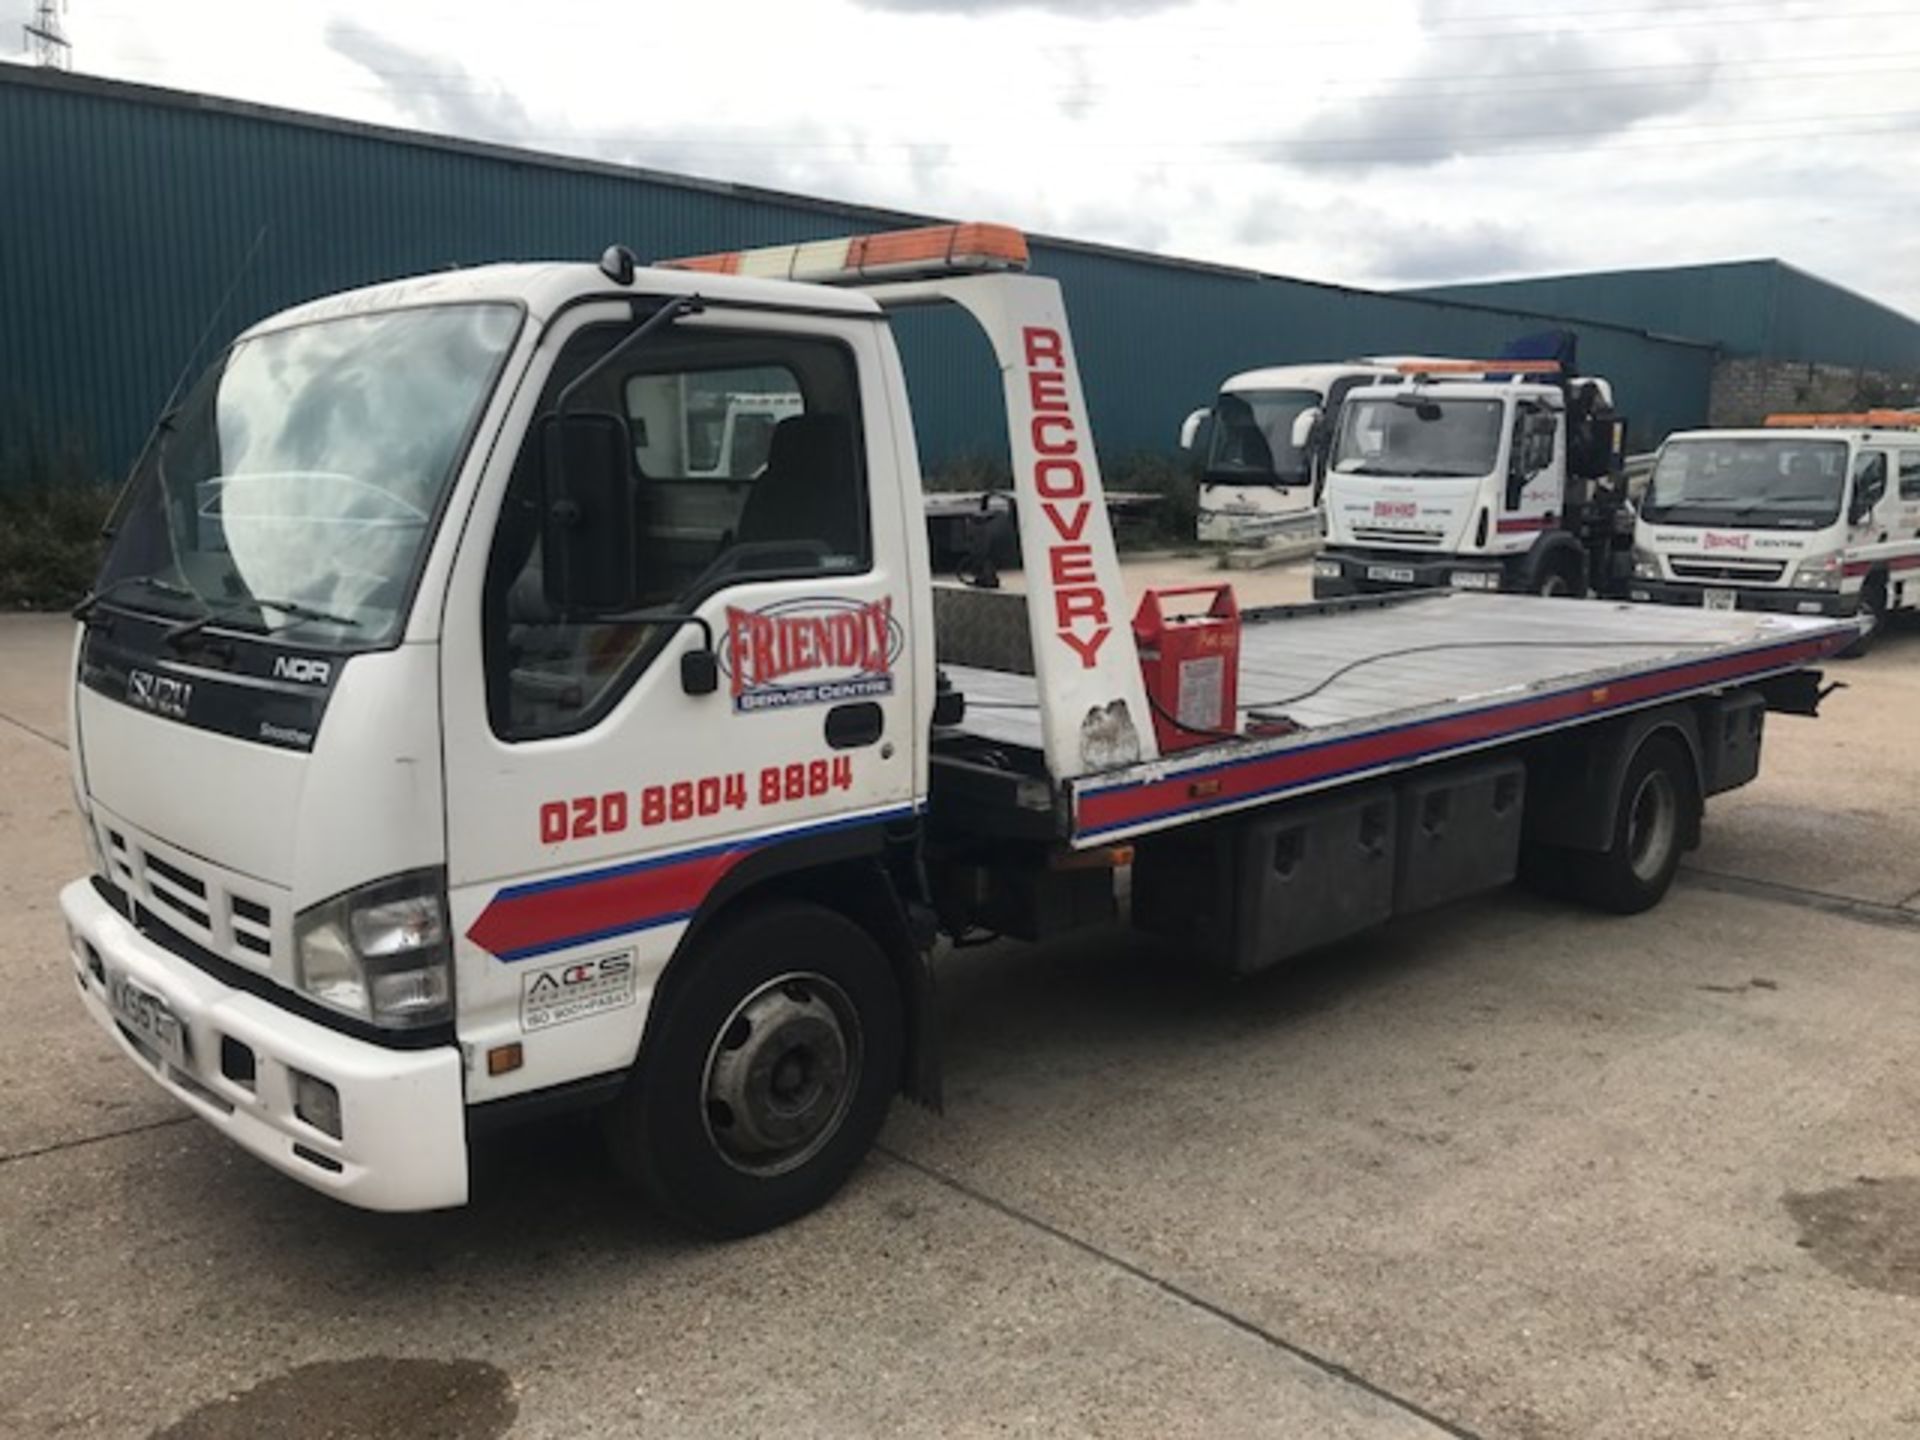 2006 Isuzu NQR 70 7.5T Easyshift breakdown recovery vehicle complete with Powertec body, winch and